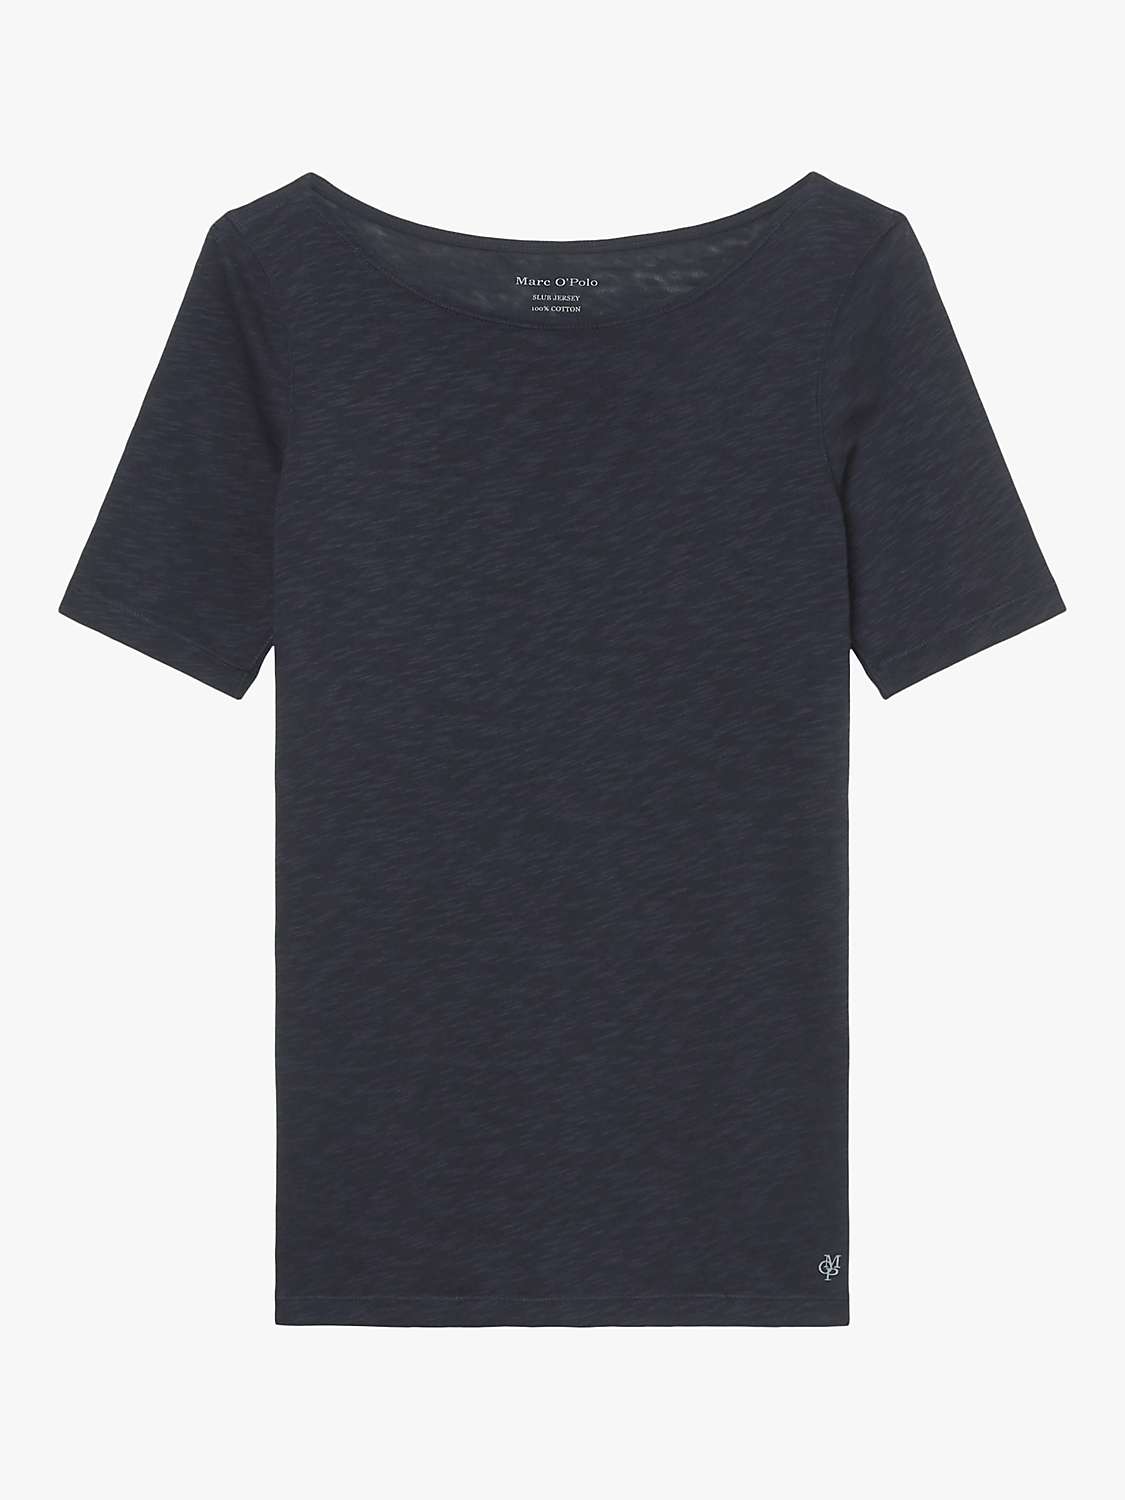 Buy Marc O'Polo Boat Neck Short Sleeve Cotton T-Shirt Online at johnlewis.com